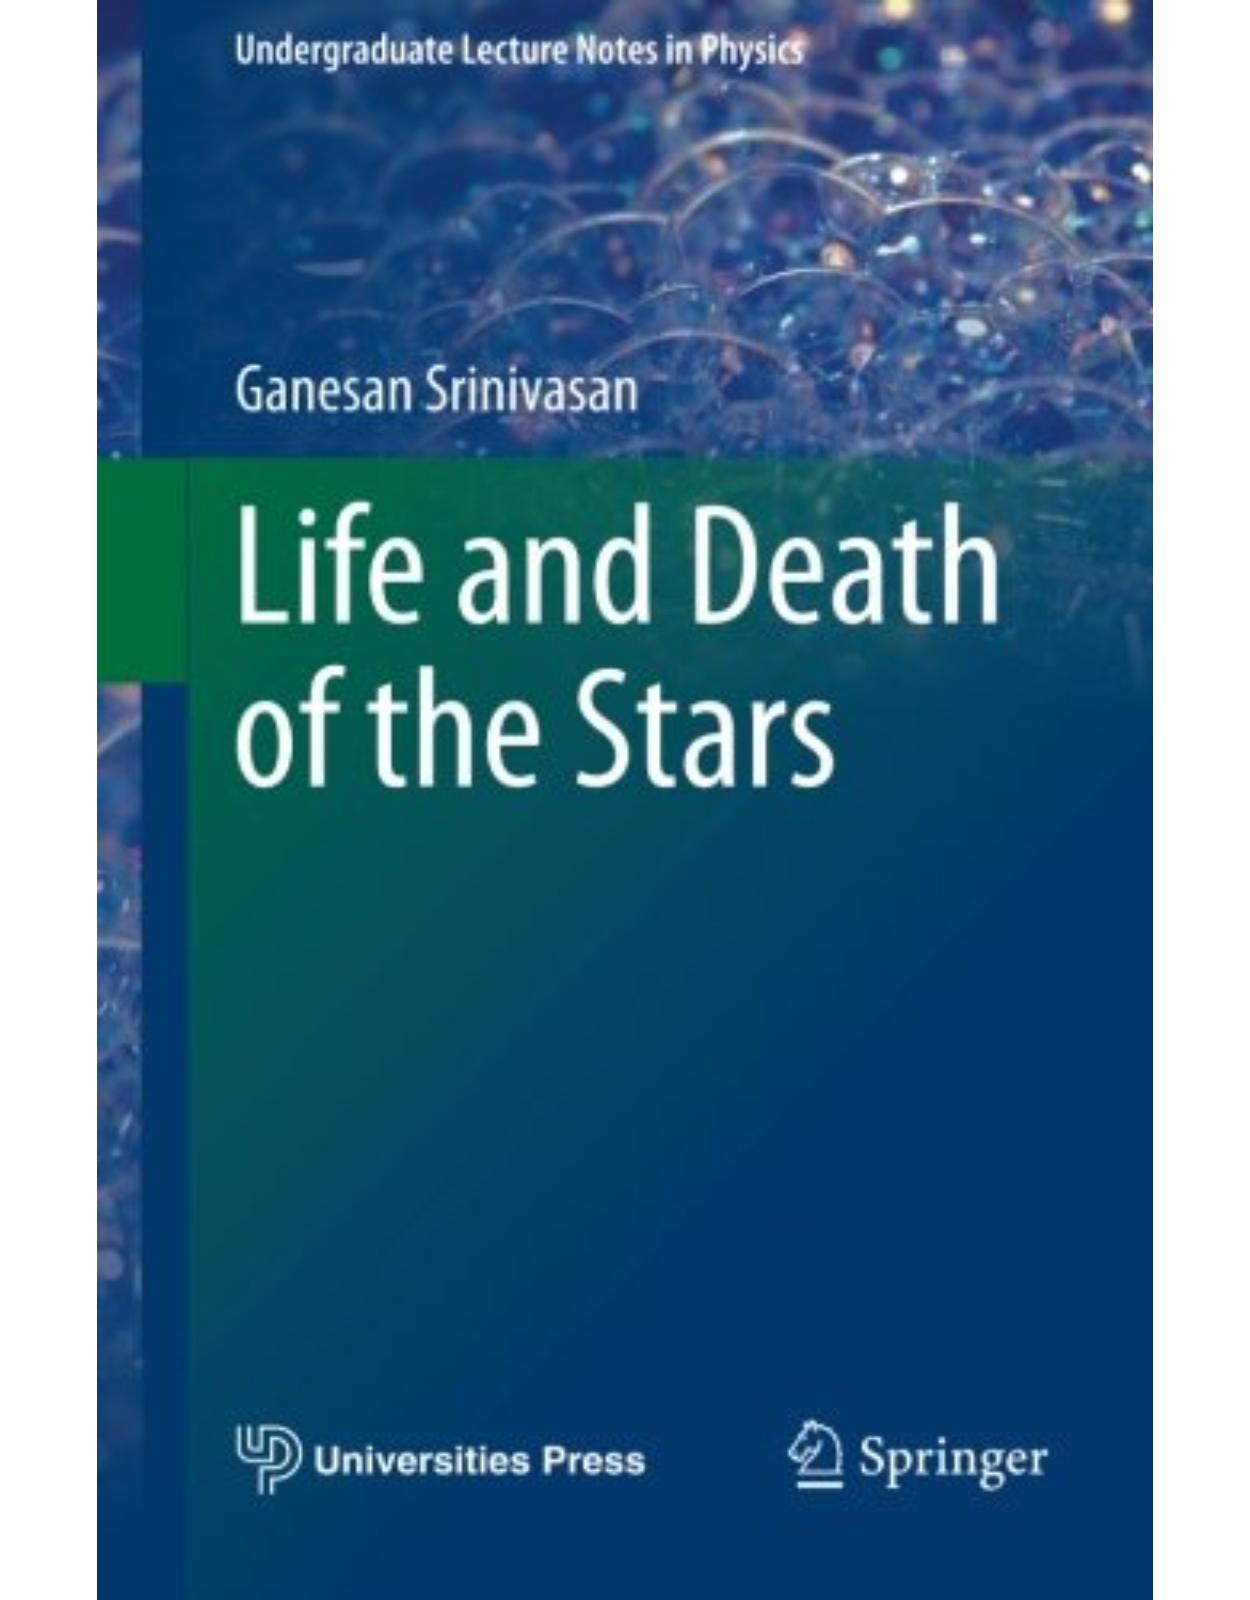 Life and Death of the Stars